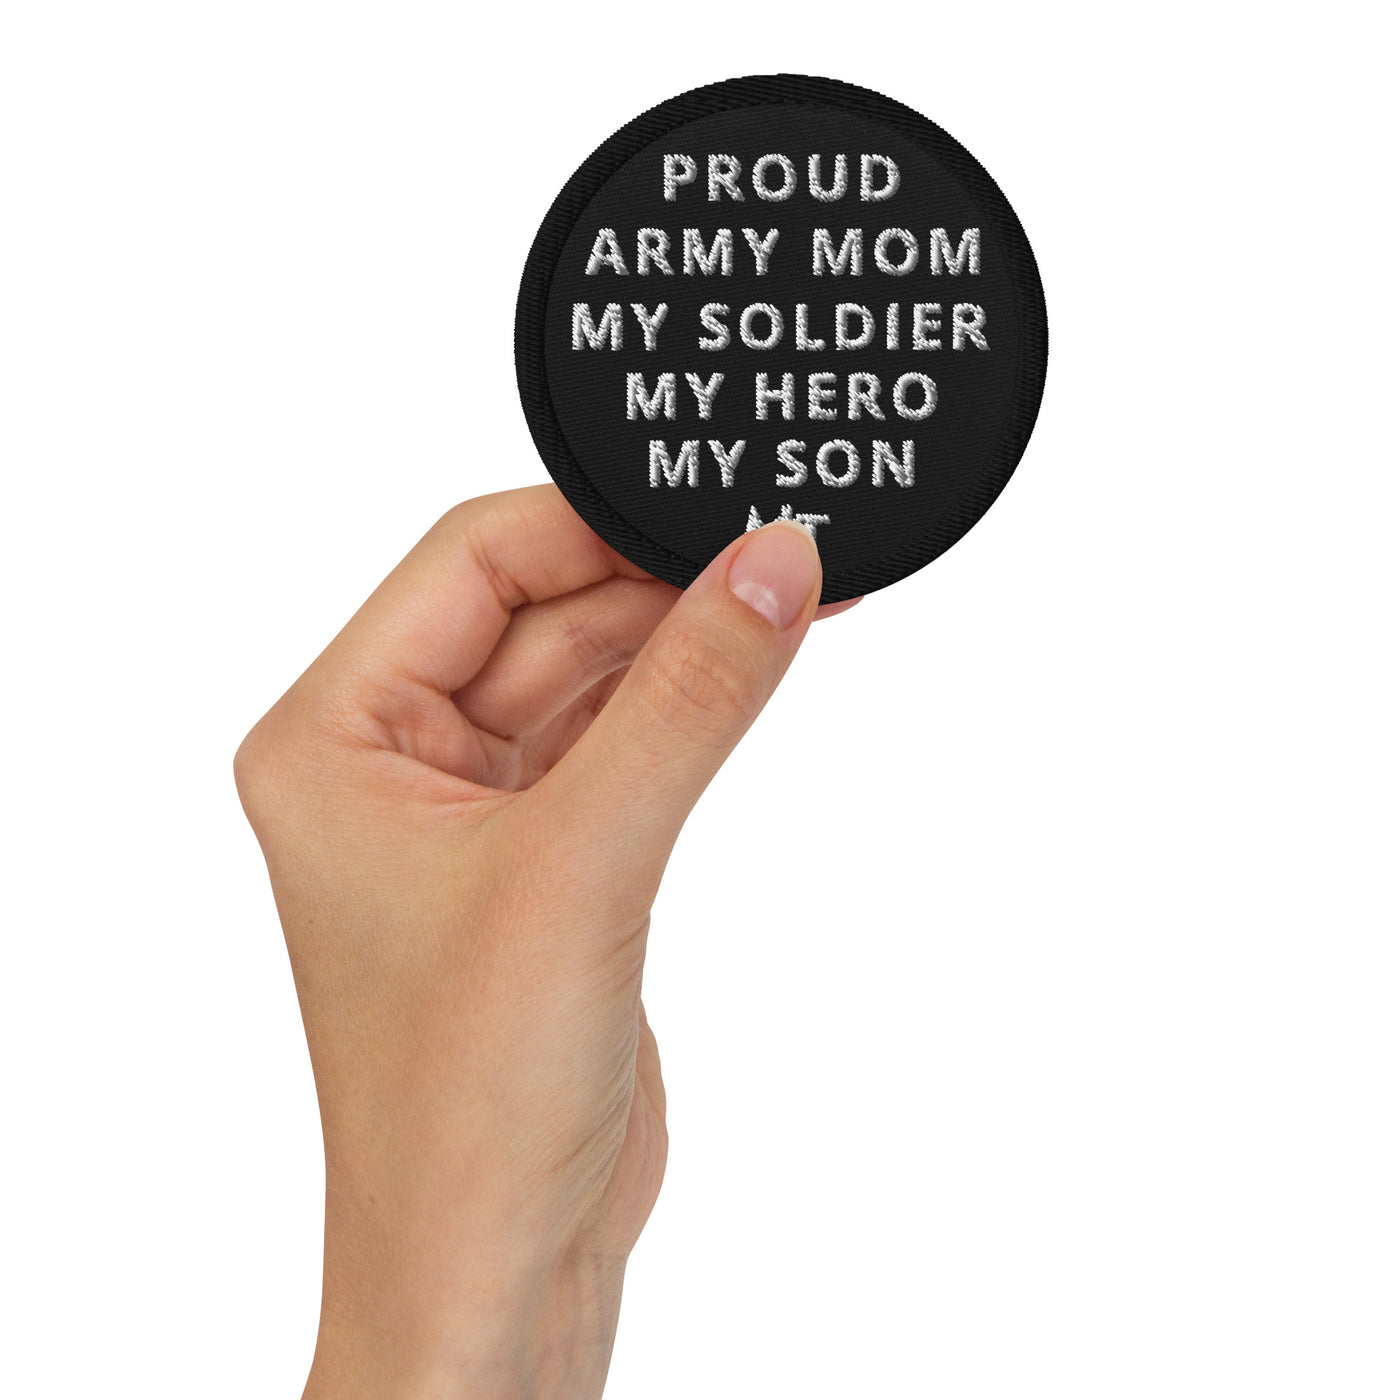 Proud Army Mom - Embroidered patches